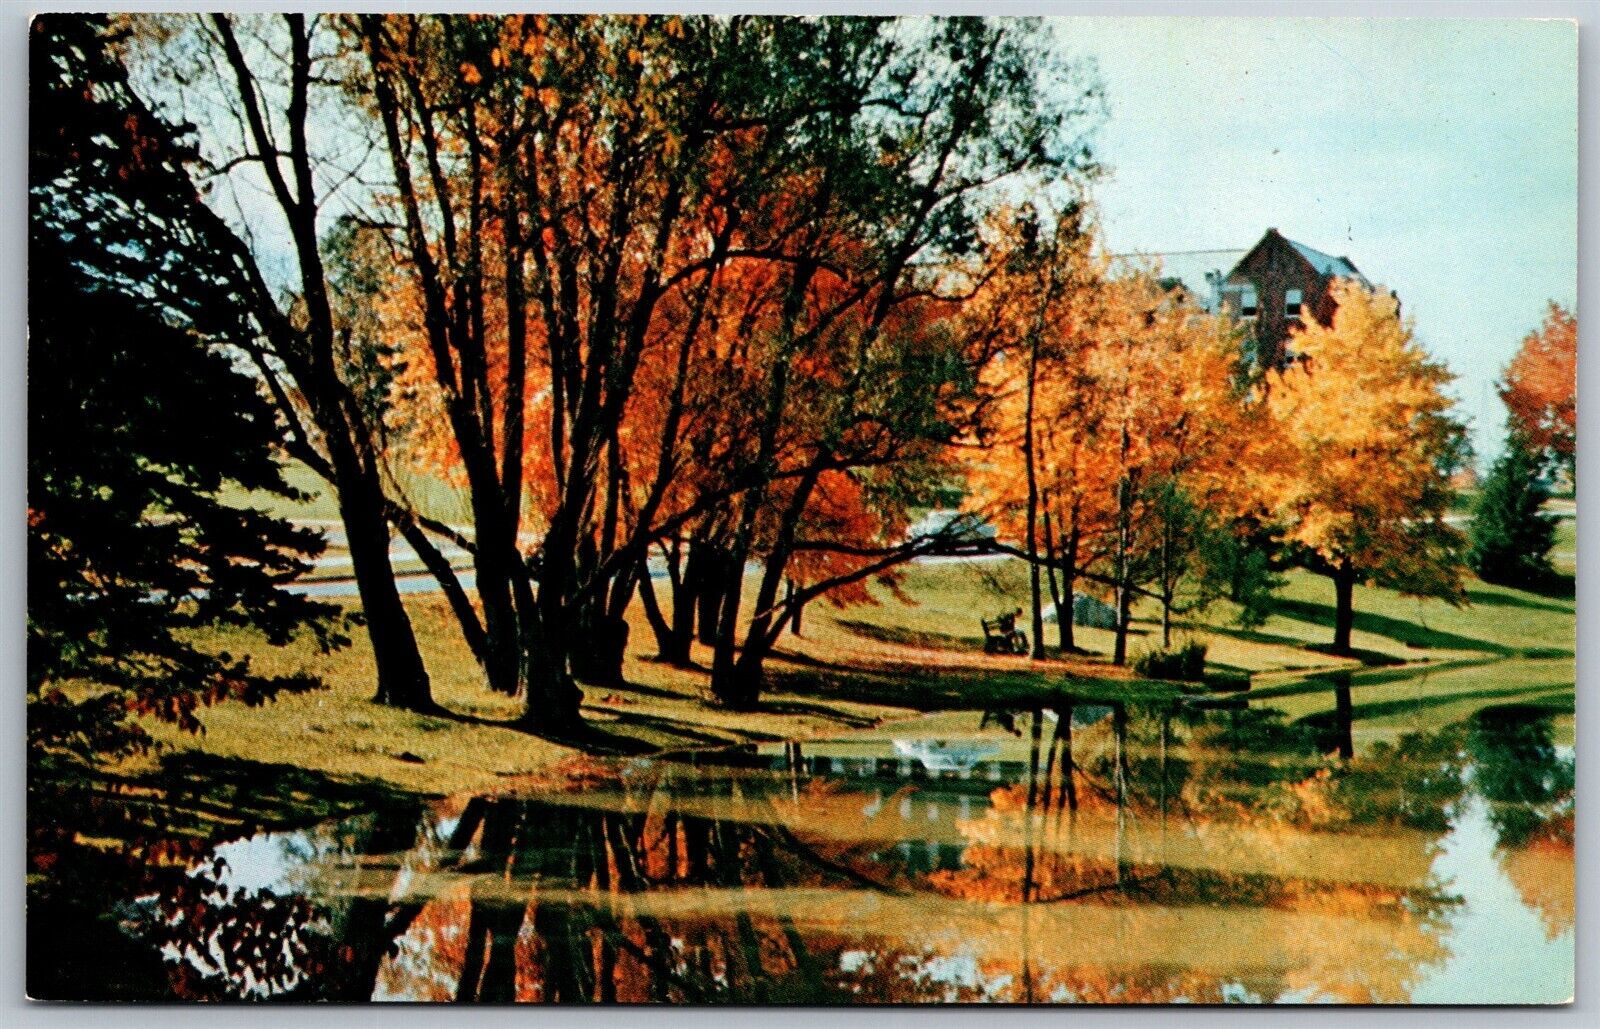 Vtg Mansfield CT Swan Lake View Koons Hall University Of Connecticut Postcard